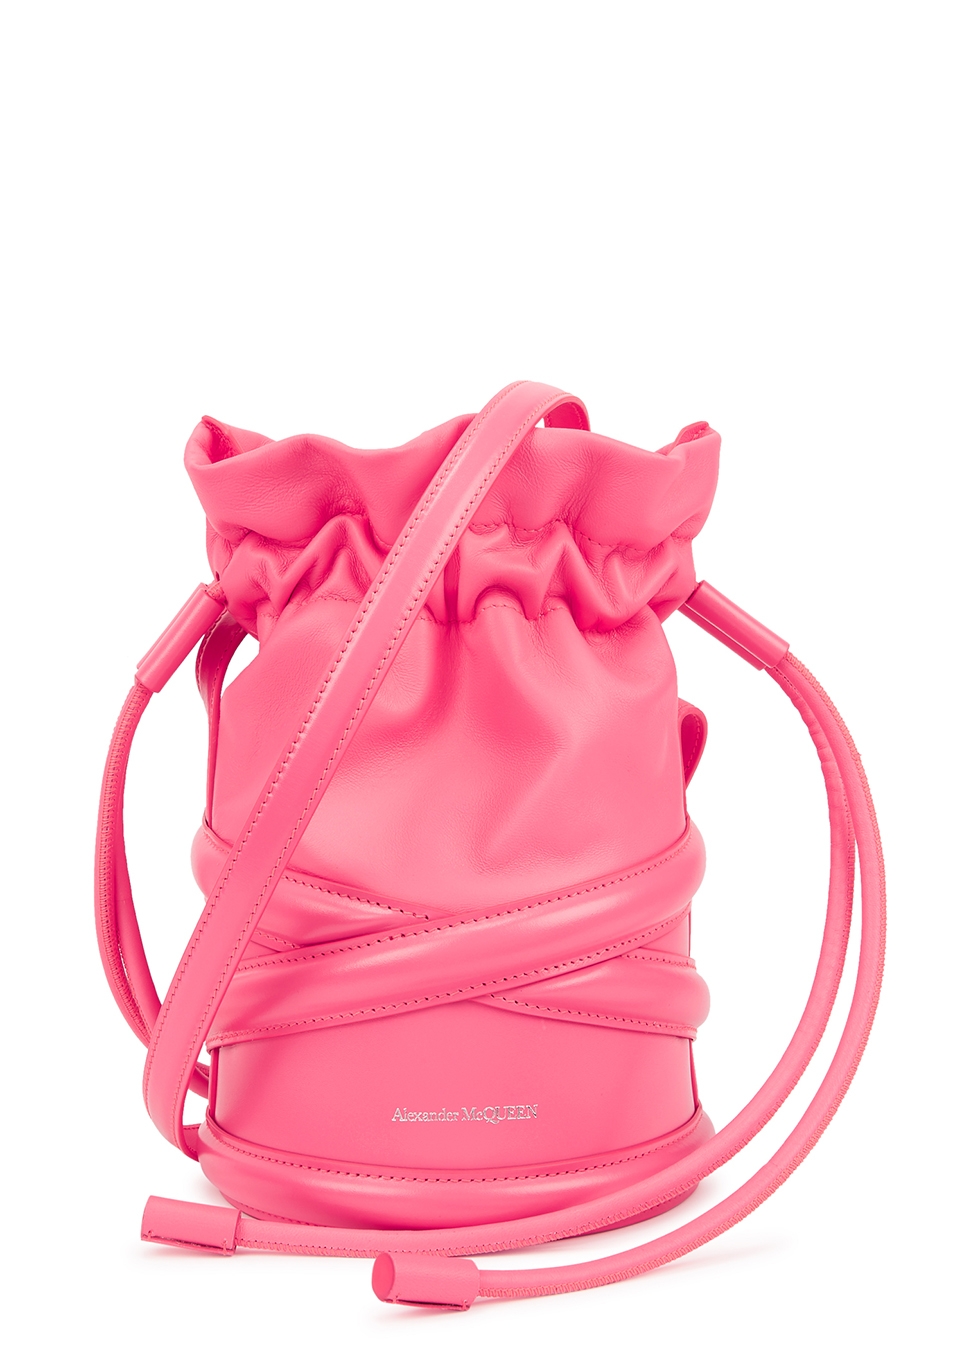 Soft Curve small pink leather bucket bag